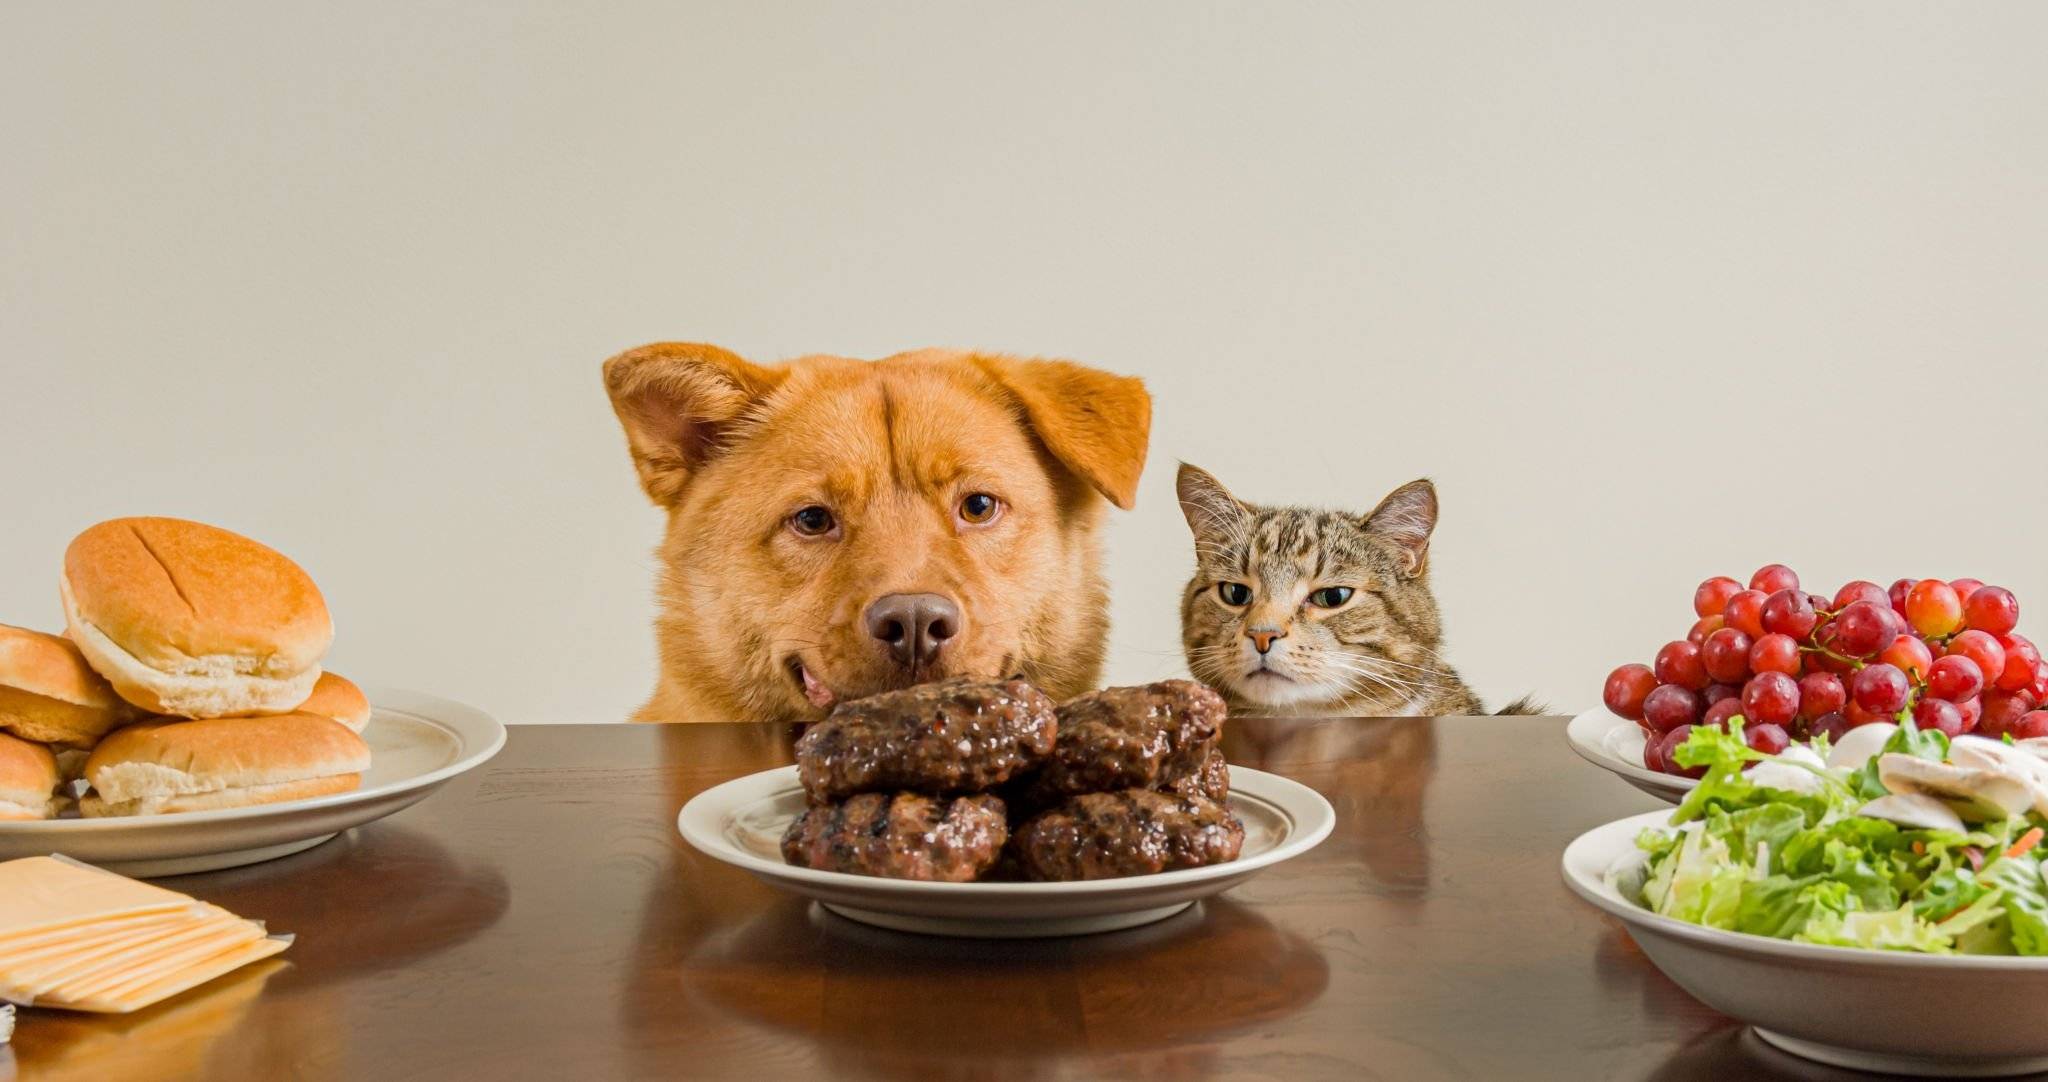 can cats eat dogs food Dog and cat staring at hamburger meat